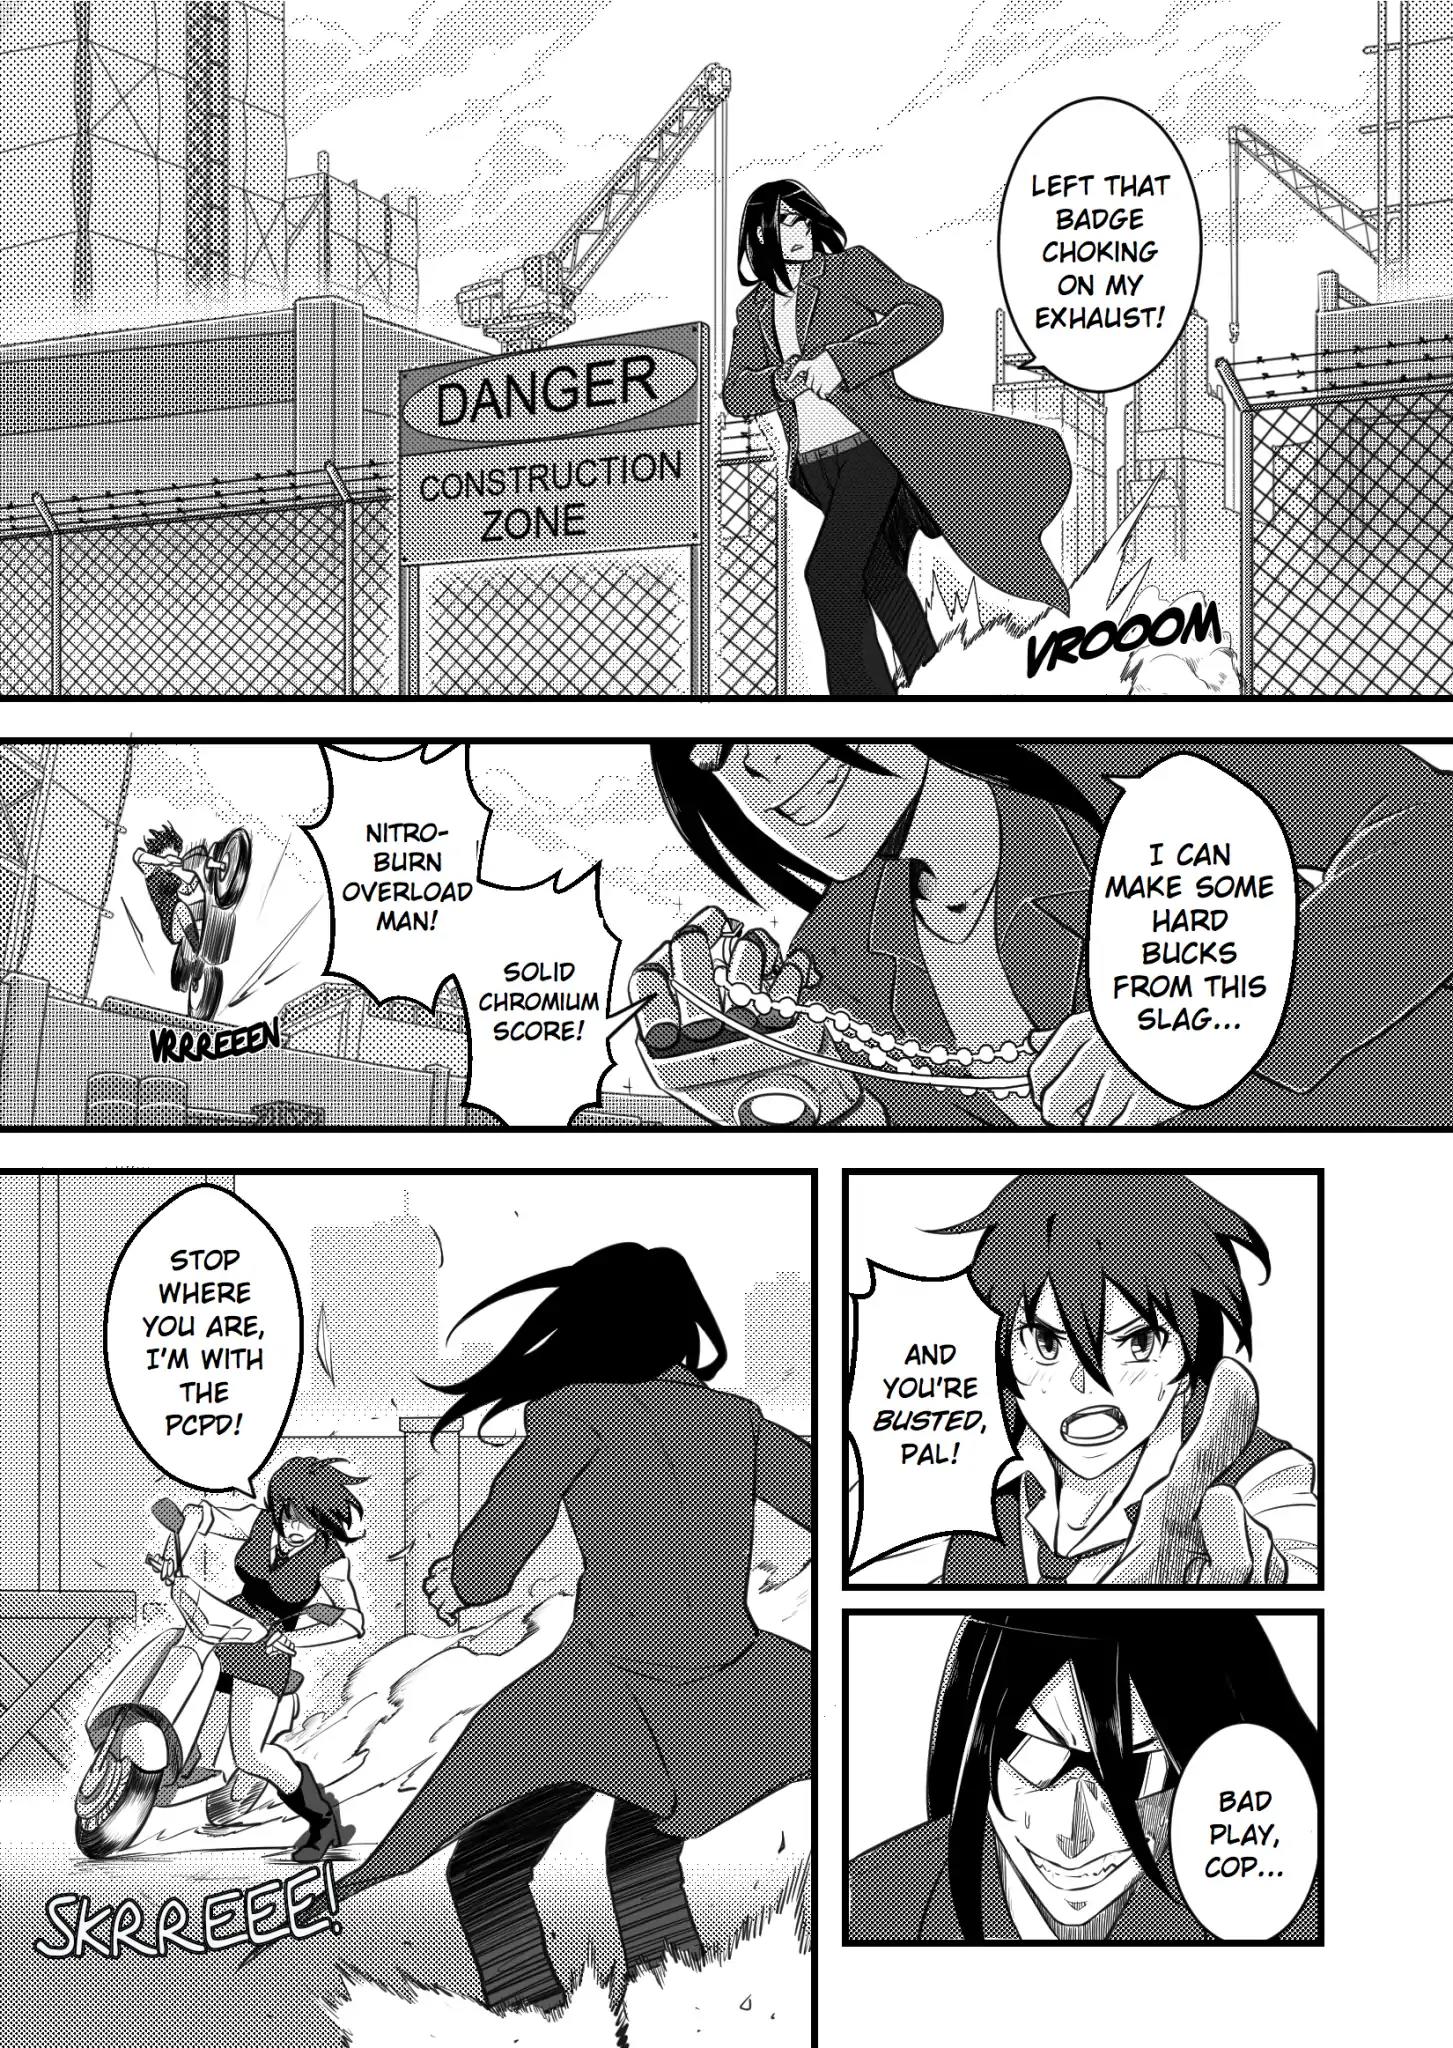 Danger Zone One Chapter 03: